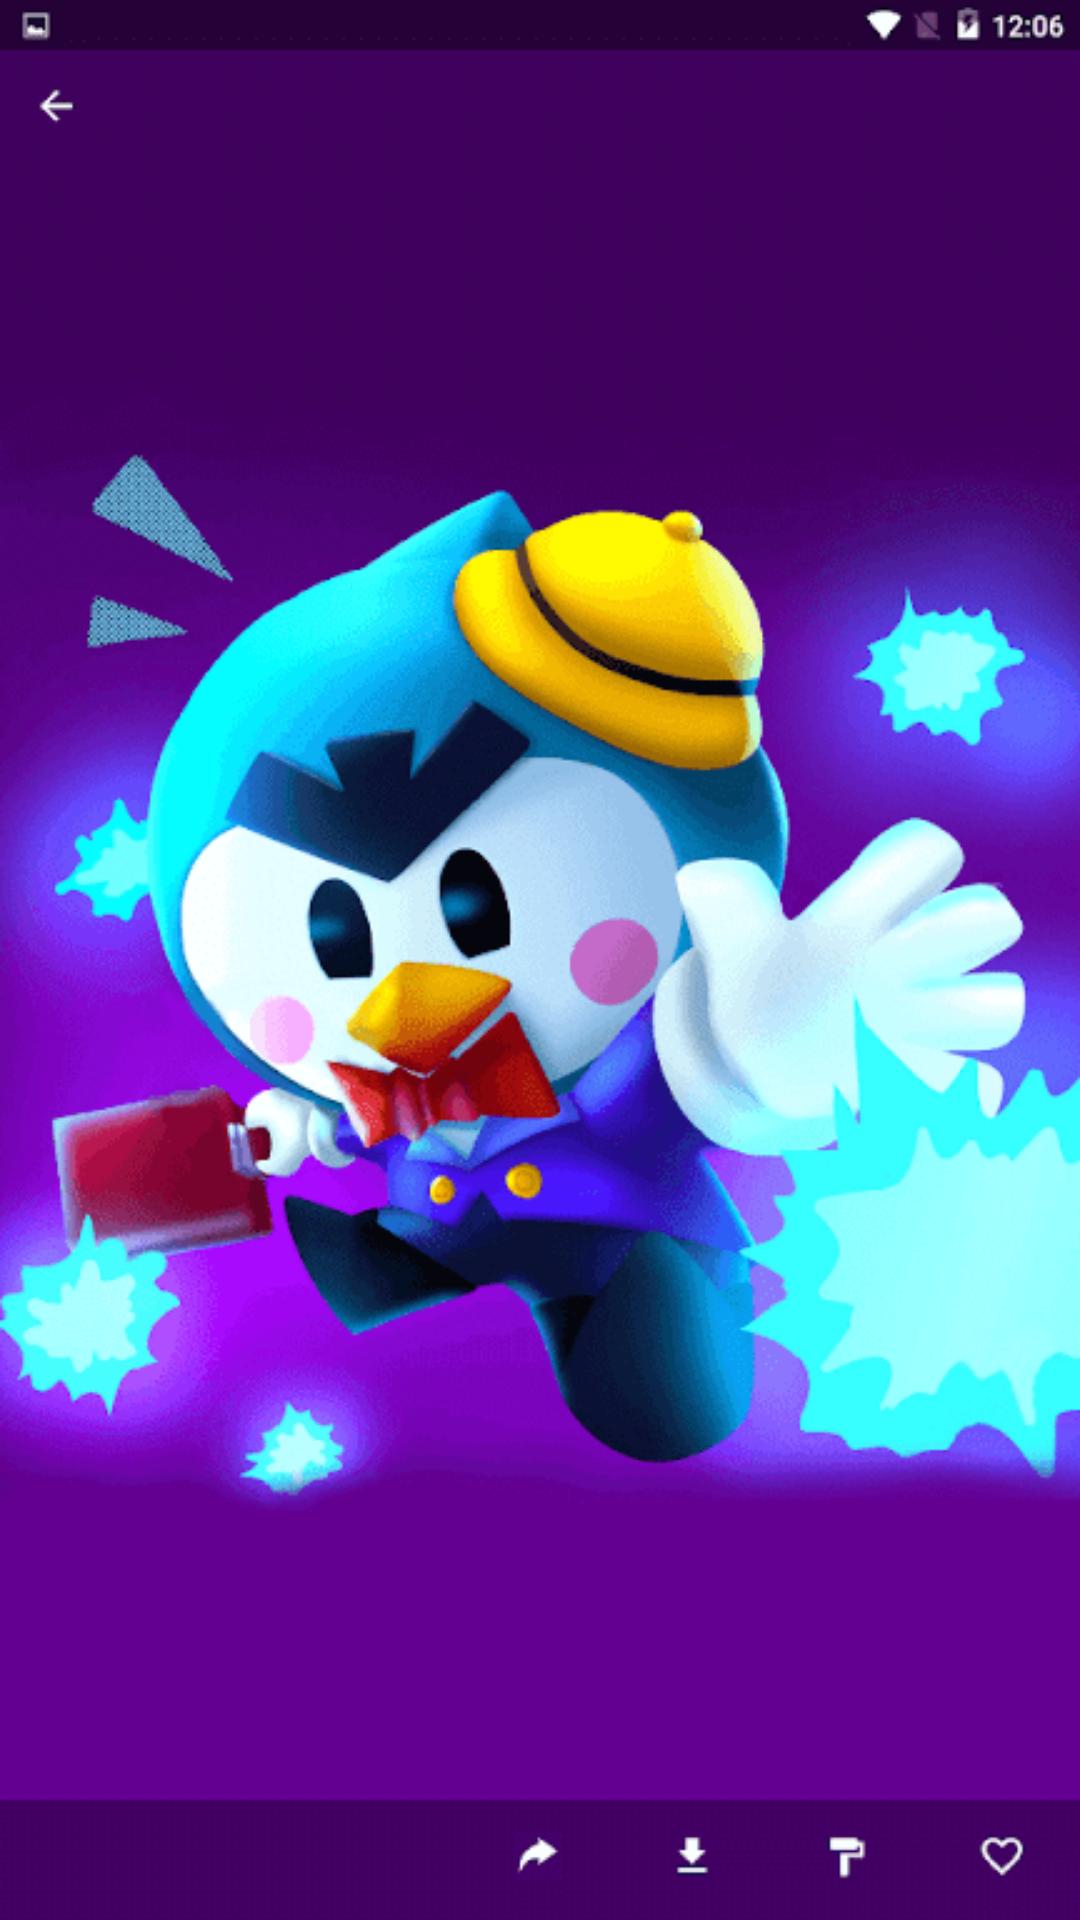 Free Hd 4k Wallpapers For Brawl Stars 2020 For Android Apk Download - fotos de brawl stars 4k